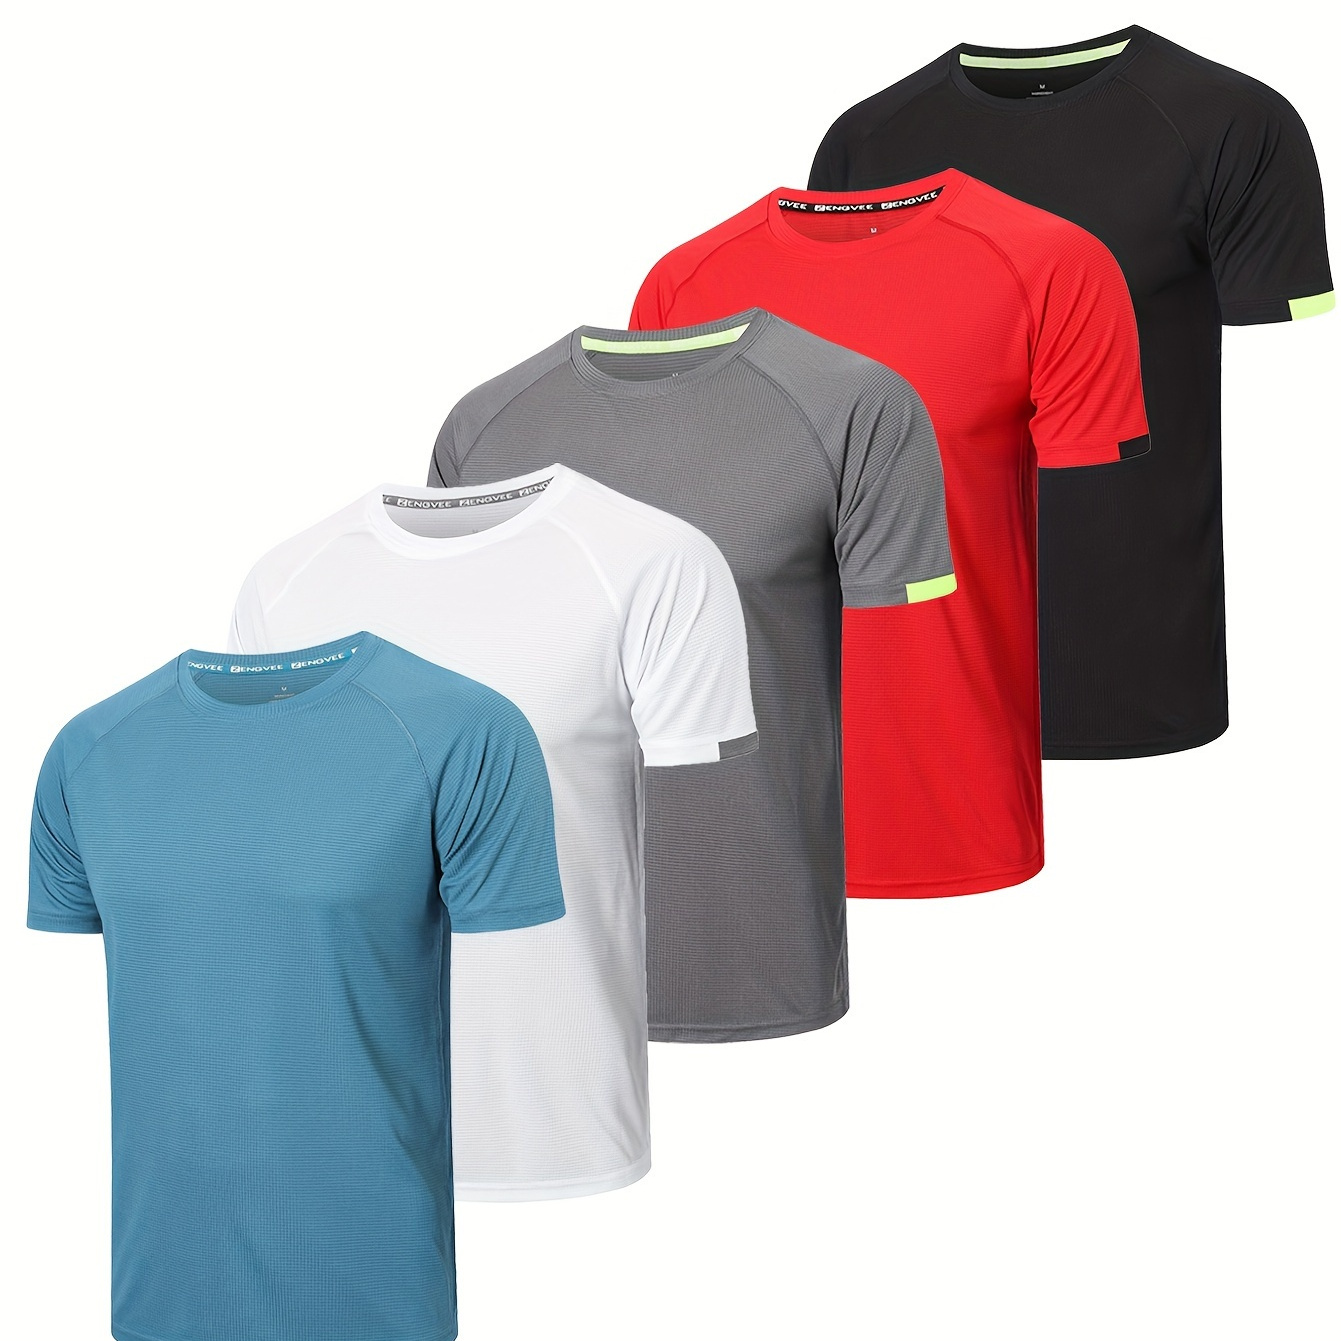 

3 Pcs, Men's Basic Solid Color Short Sleeve Comfy T-shirt, Breathable Tee Men's Summer Clothes For Fitness